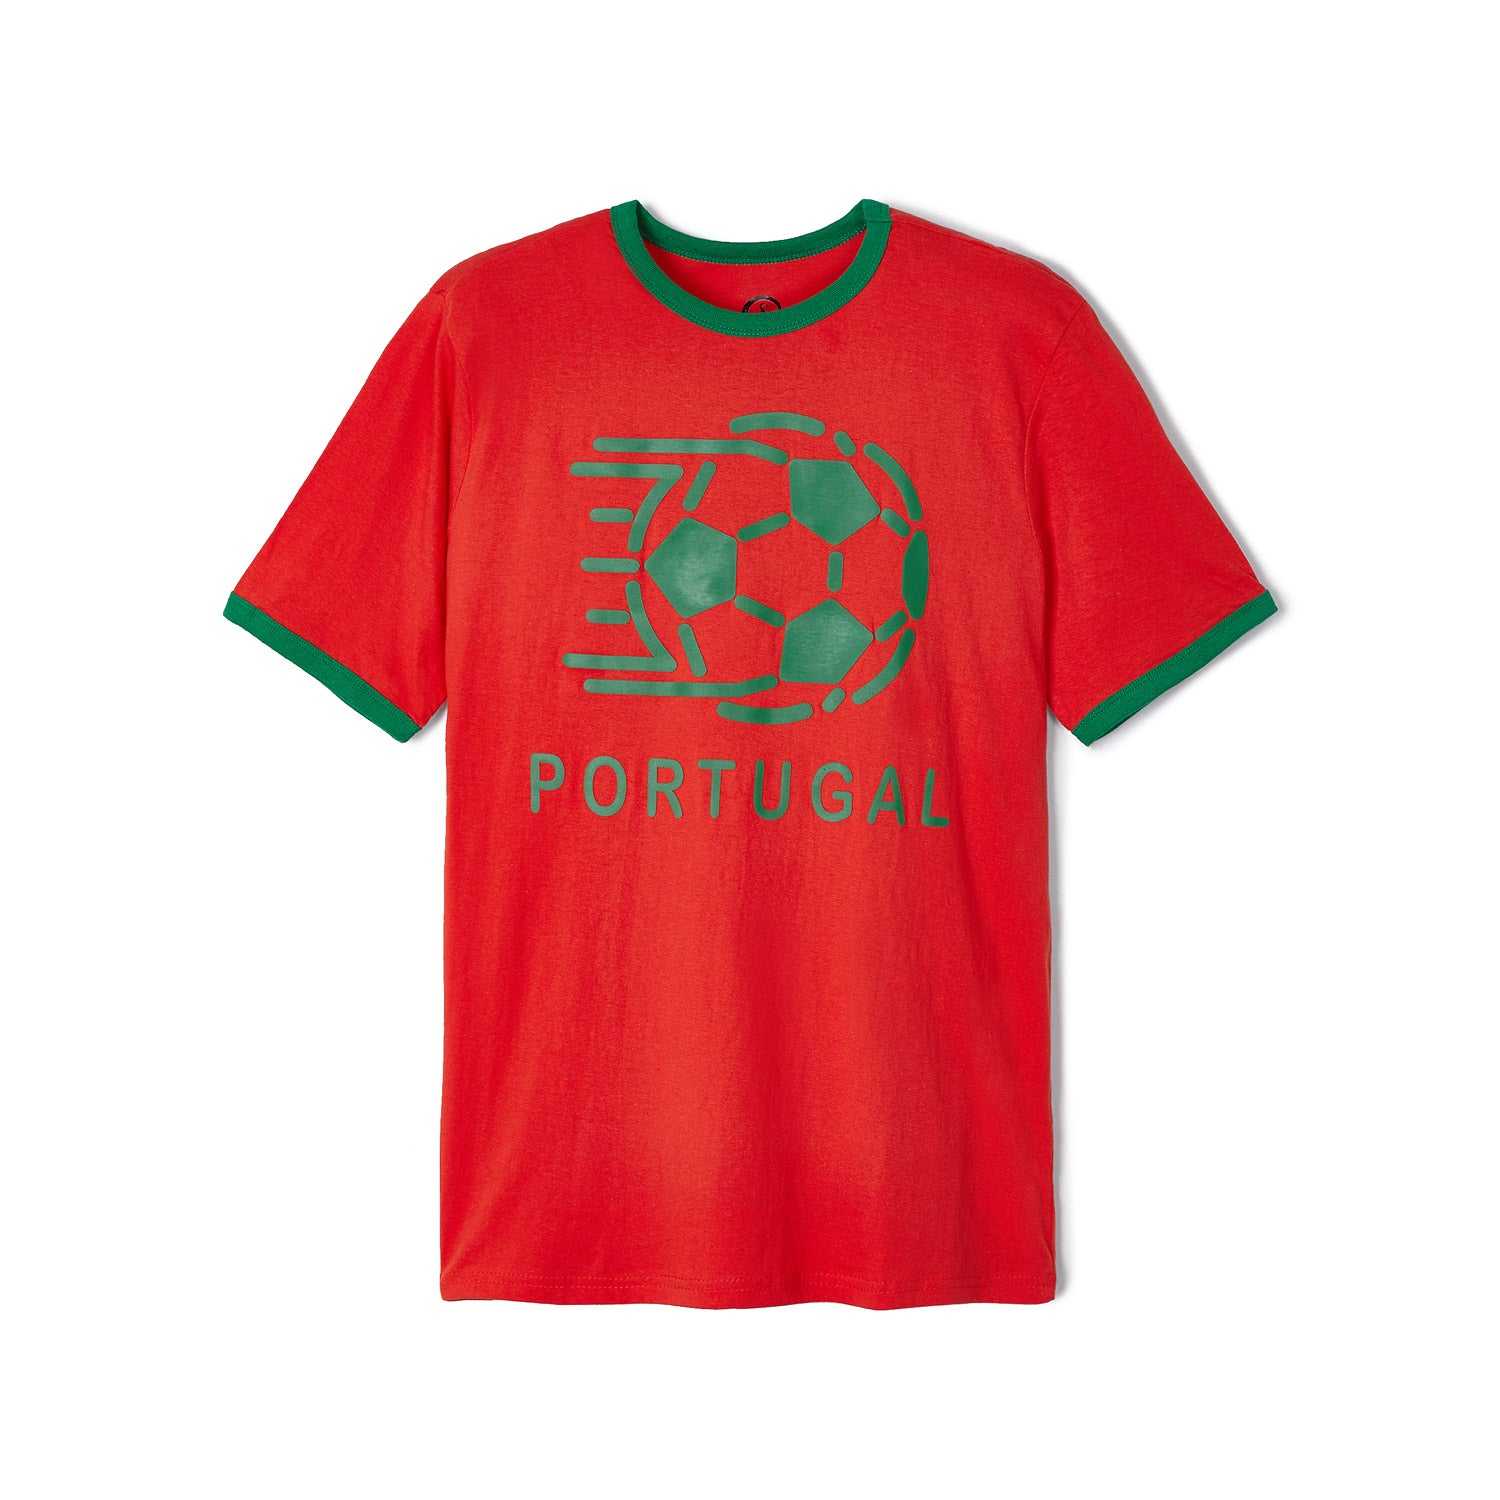 2022 World Cup Portugal Ringer Red T-Shirt - Mens